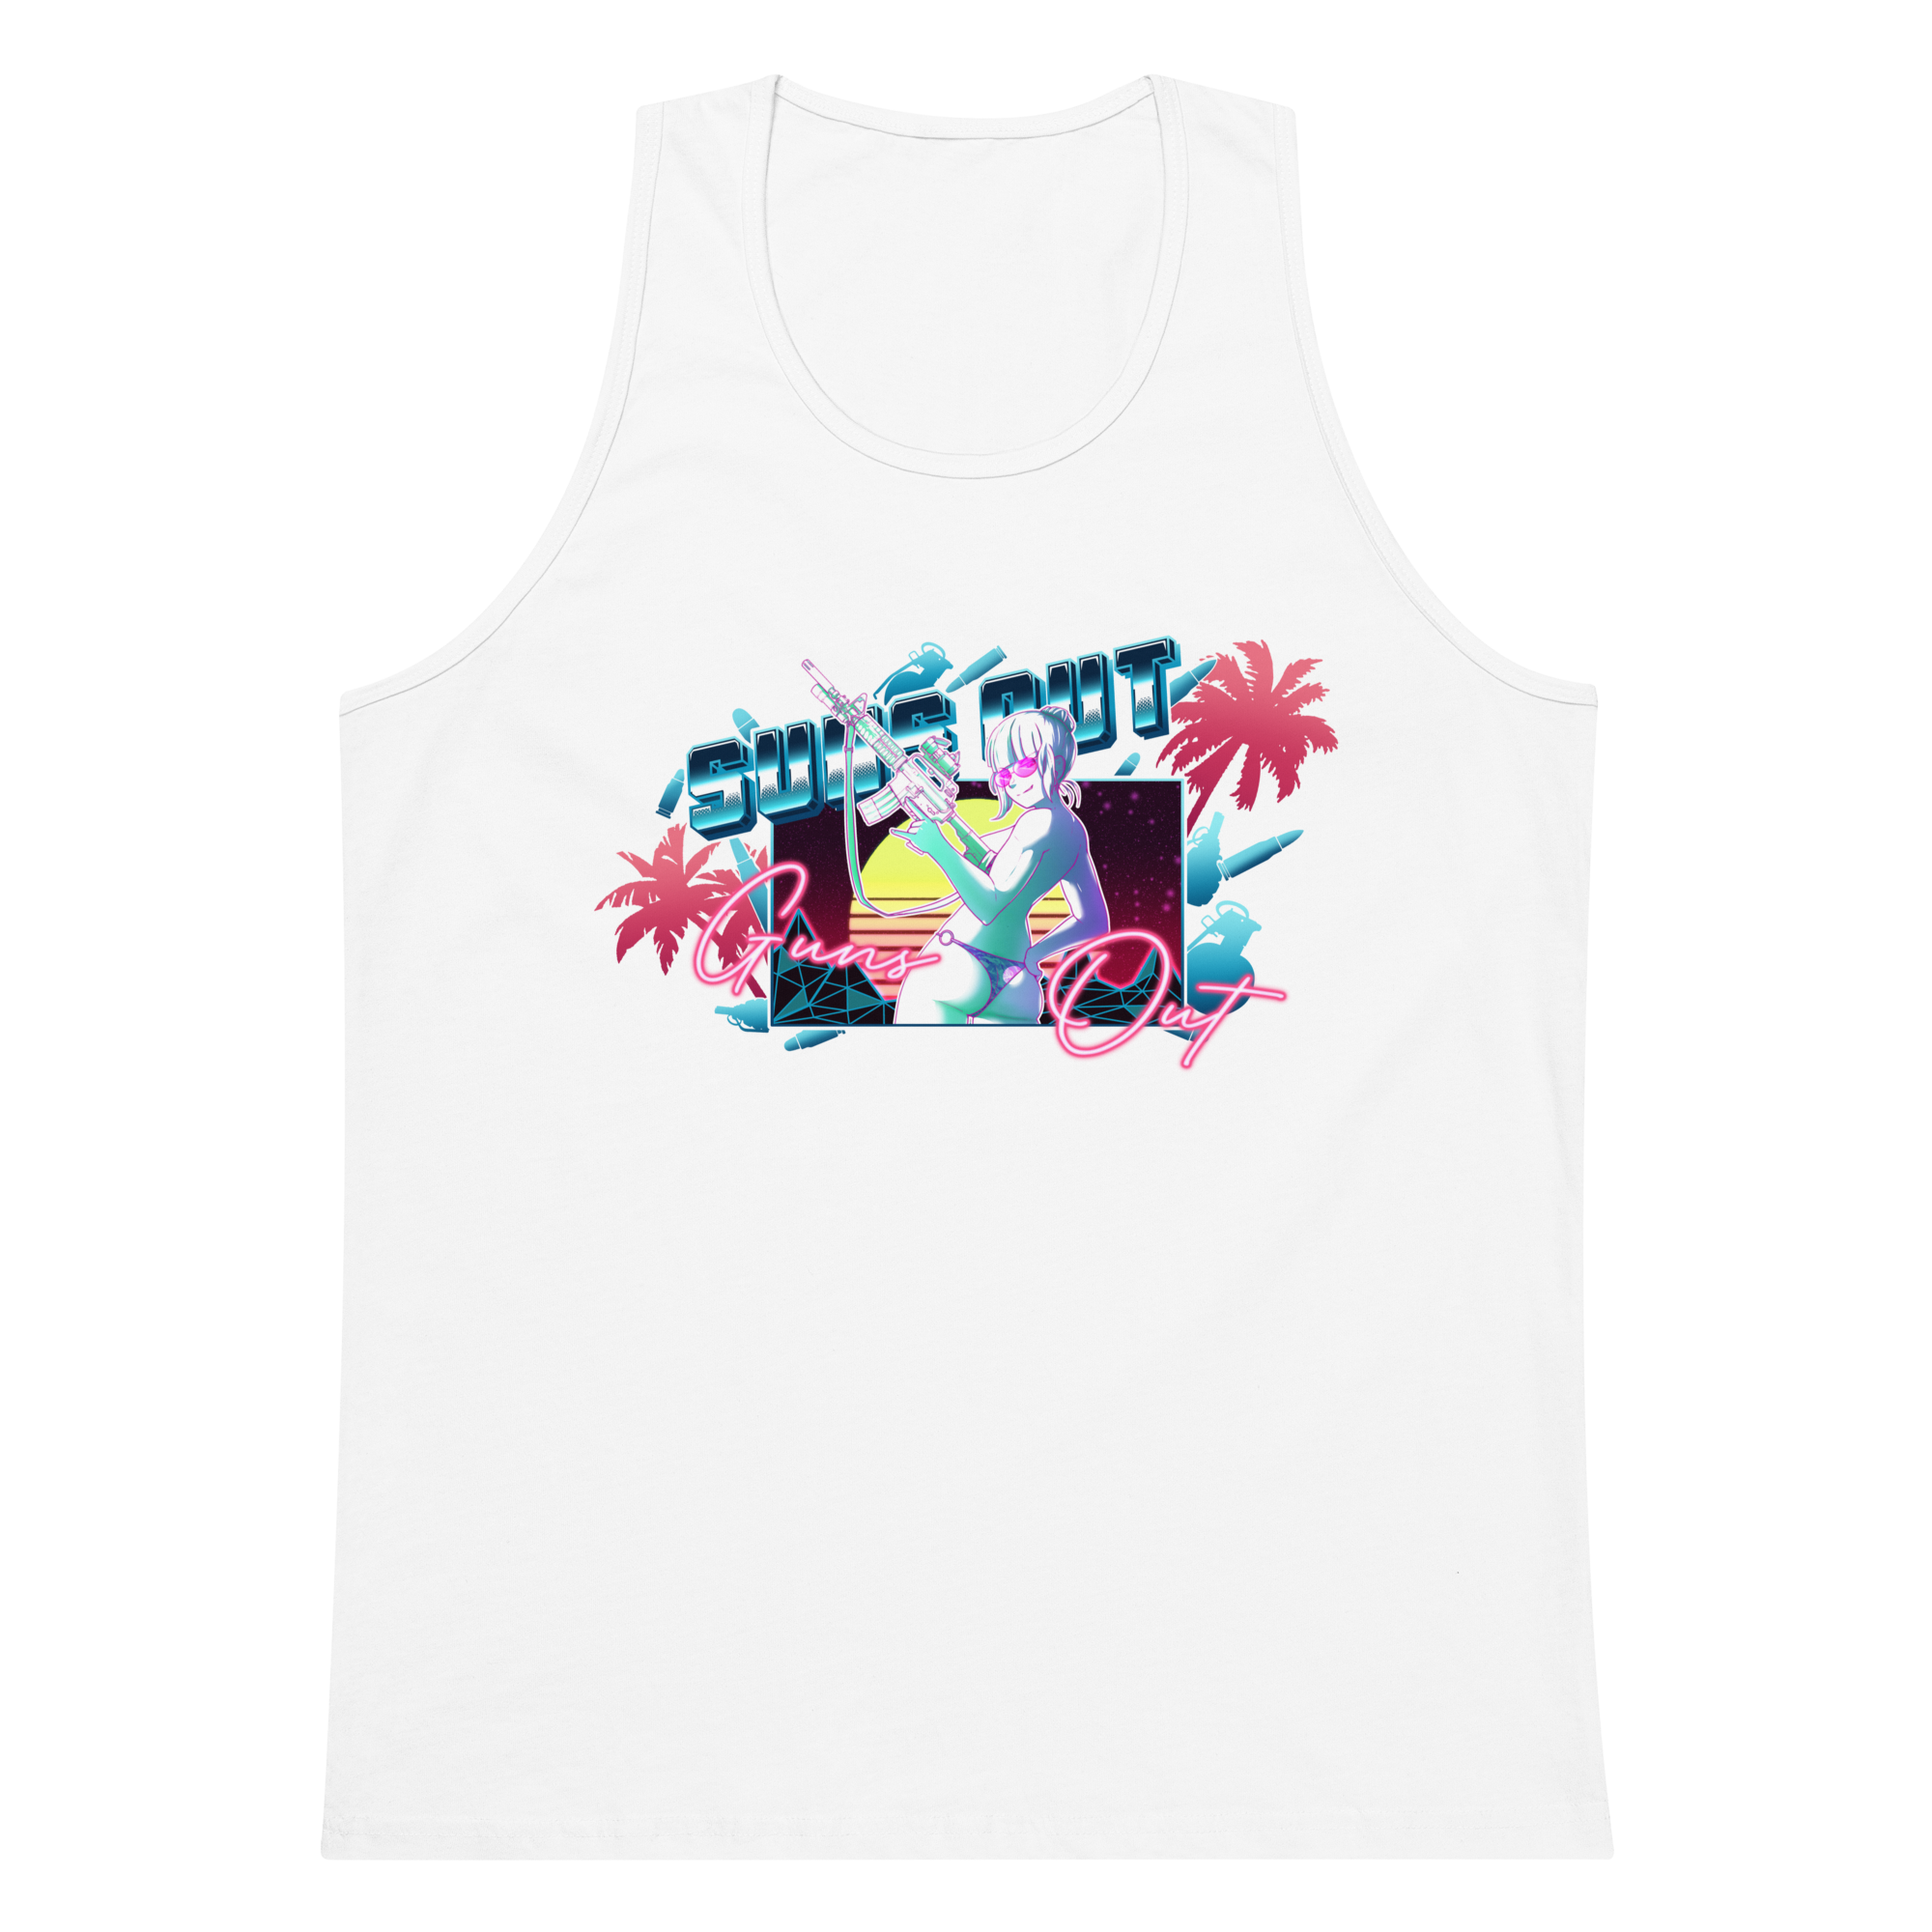 Suns Out V2 tank top